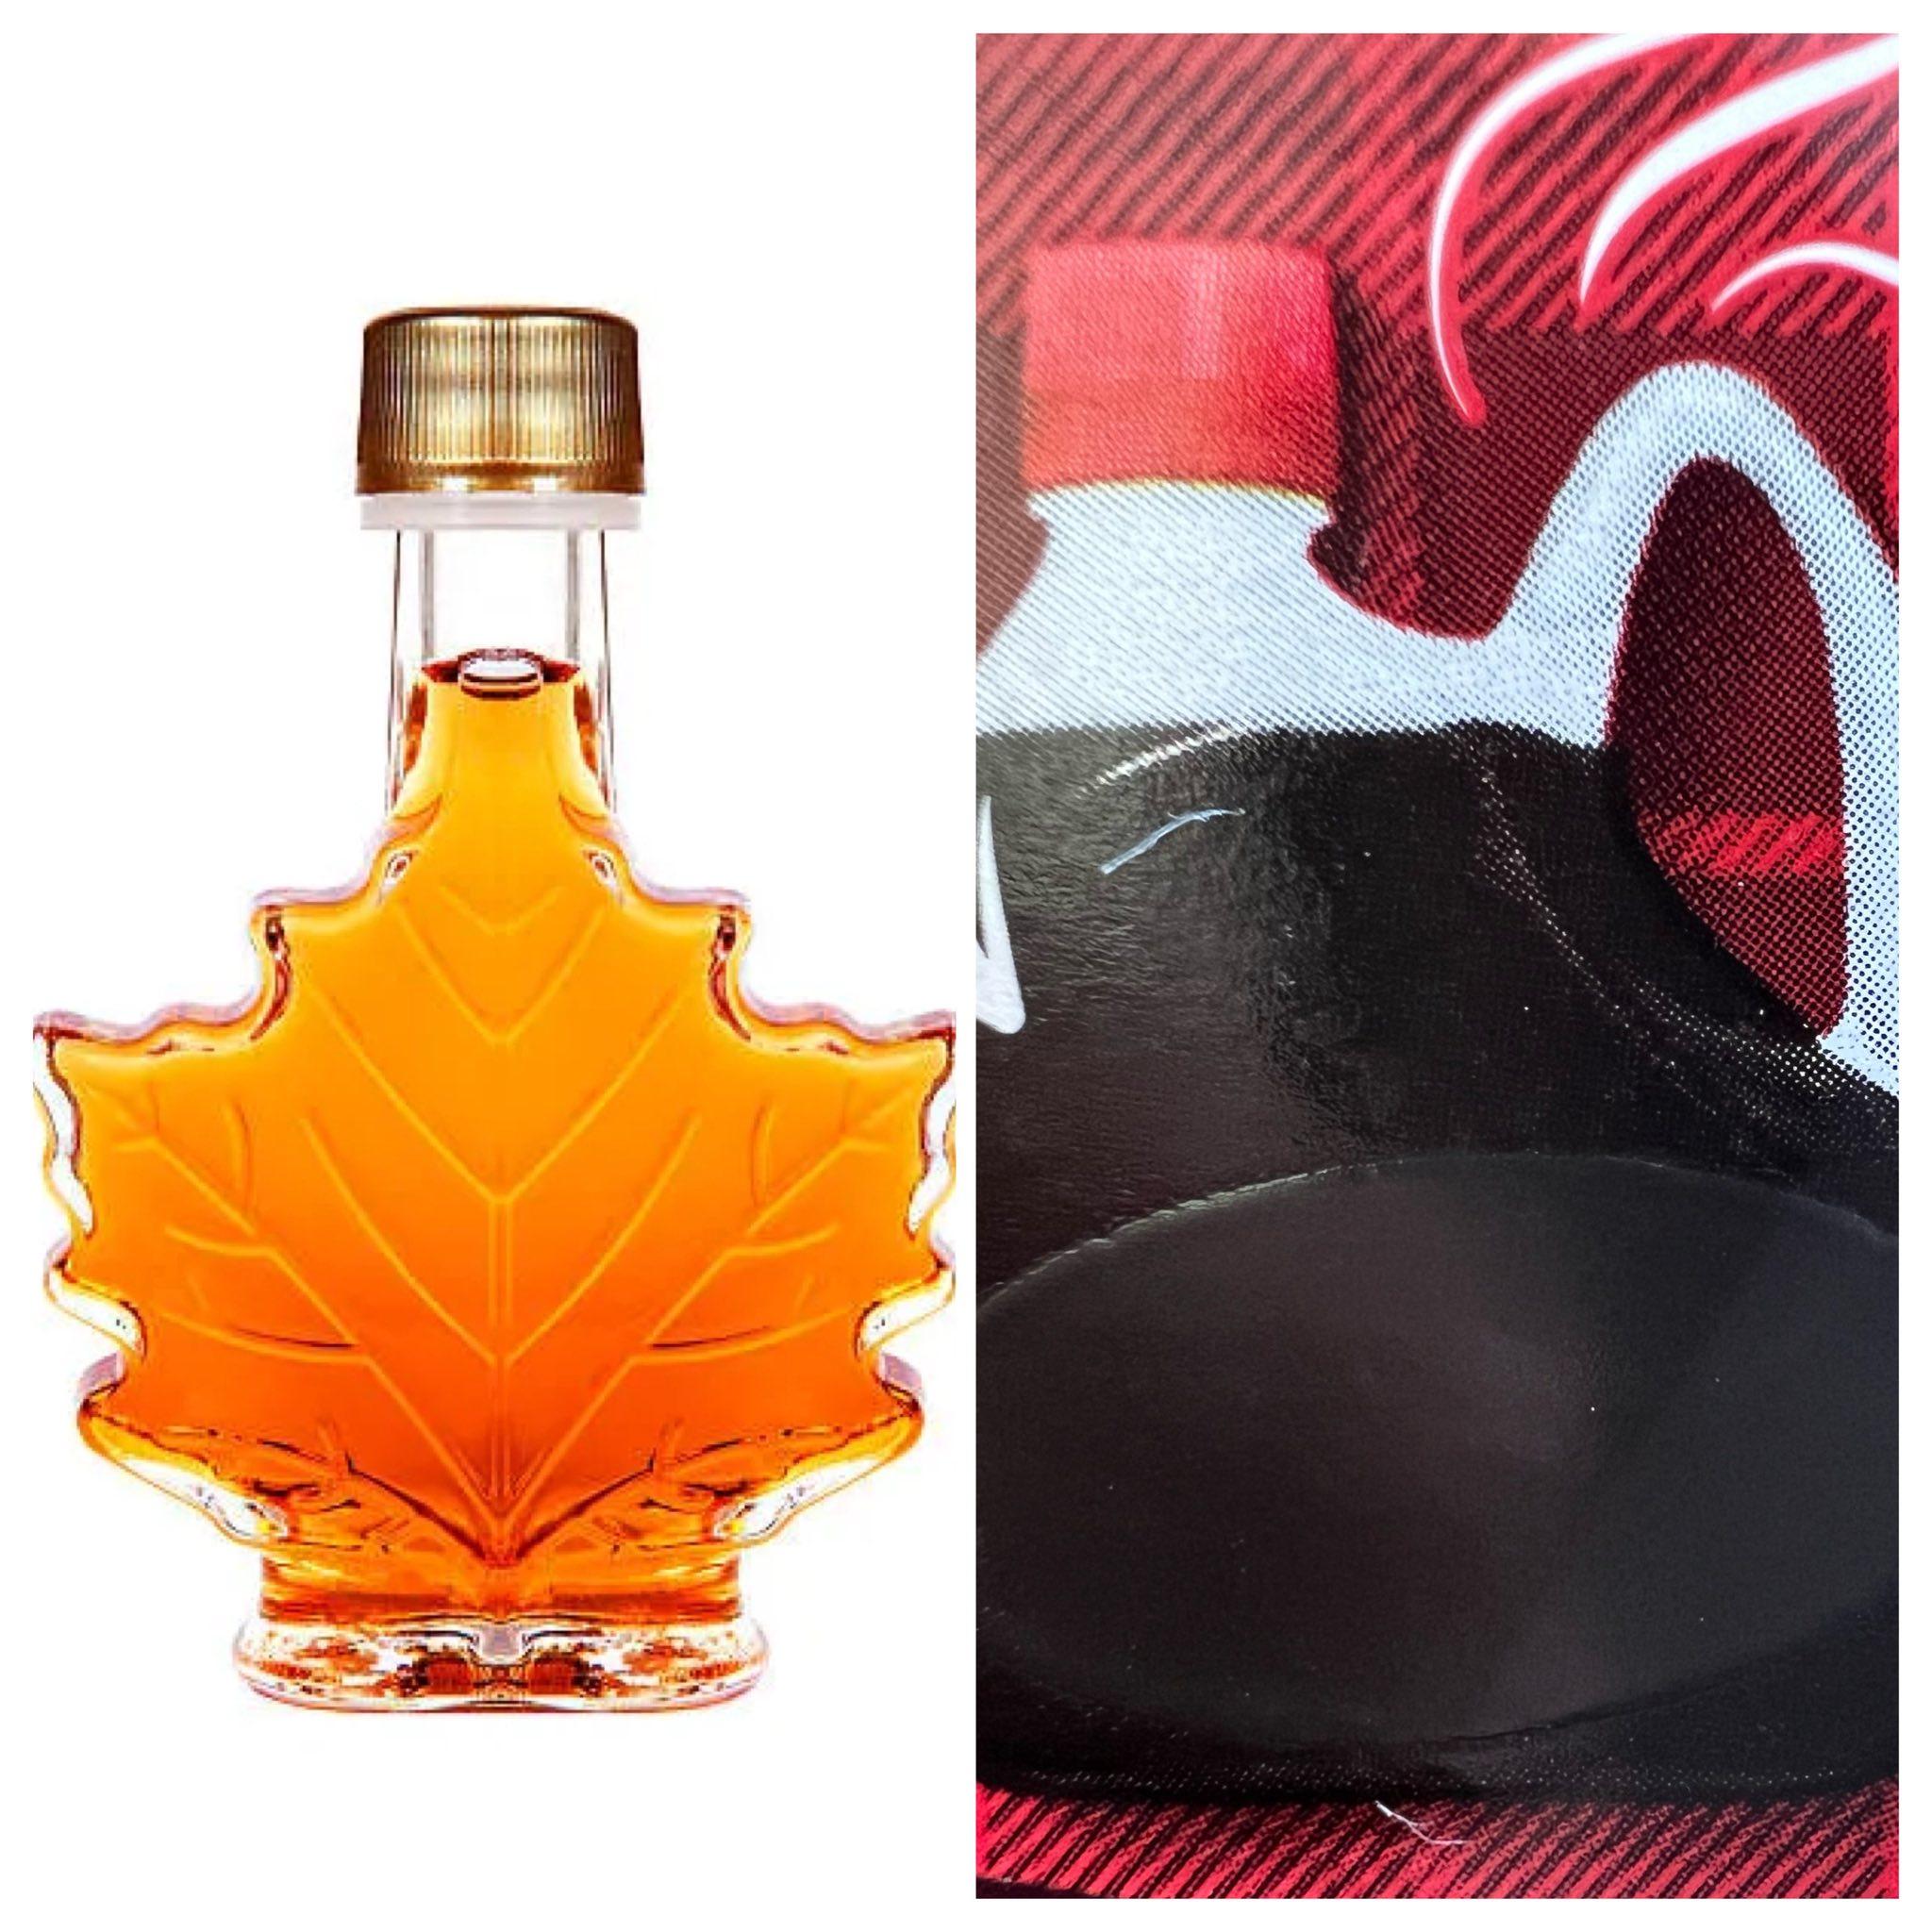 Maple Syrup Please! Just Say No to High Fructose Corn Syrup!